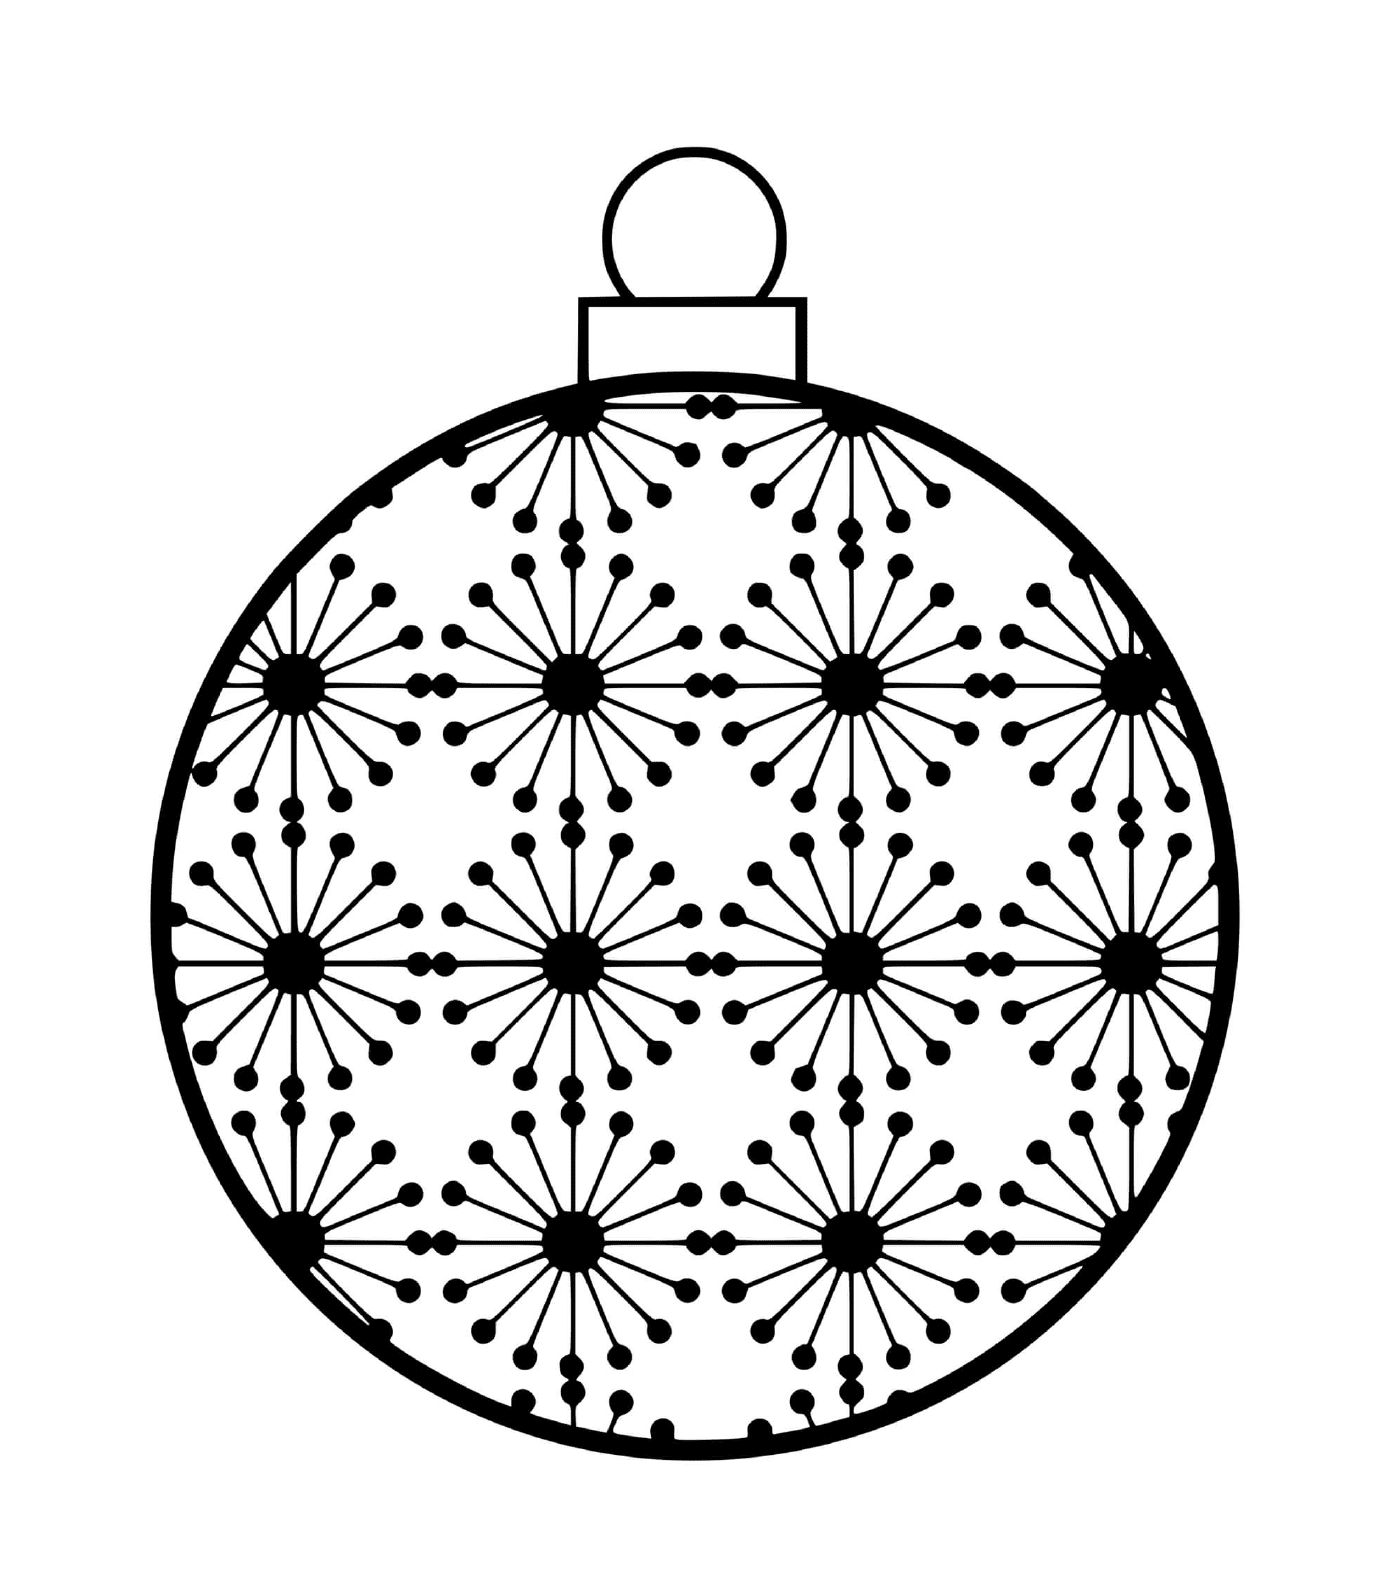  A Christmas ball with scientific patterns of atoms 